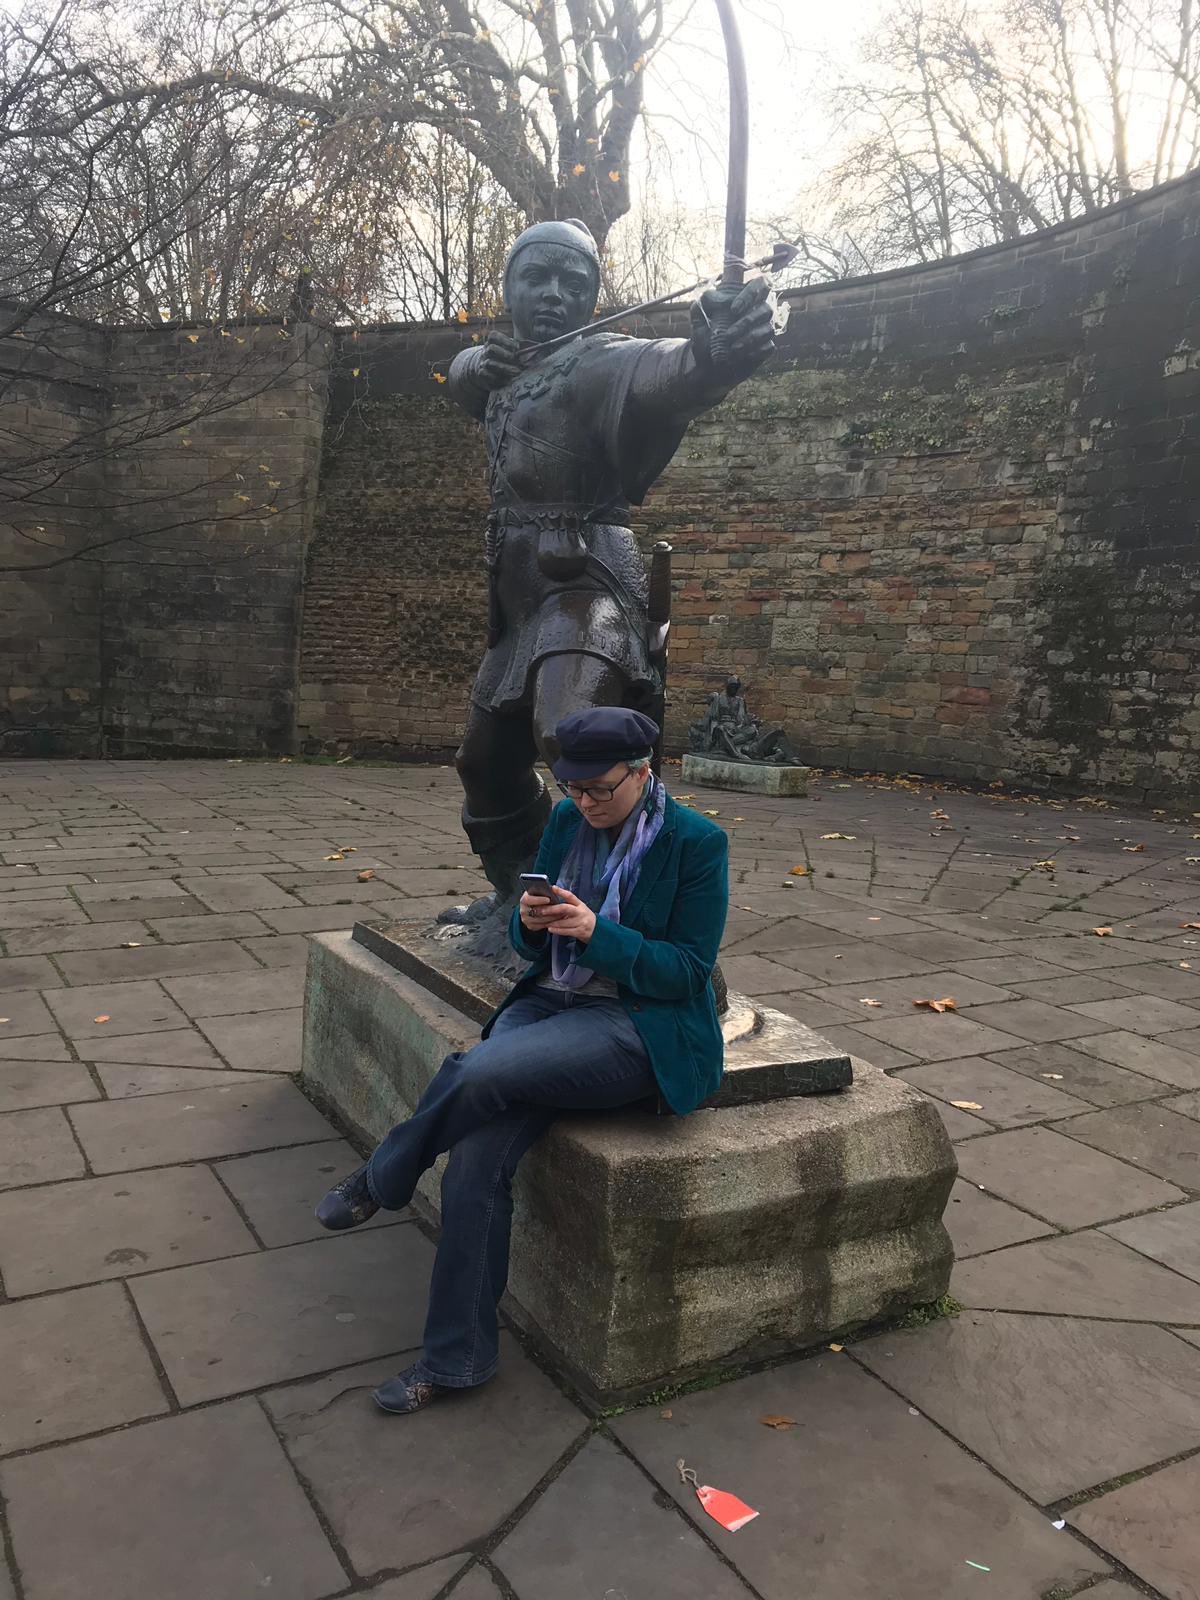 A person in a green jacket and blue hat sits on the pedestal of a statue of Robin Hood, writing on their phone.